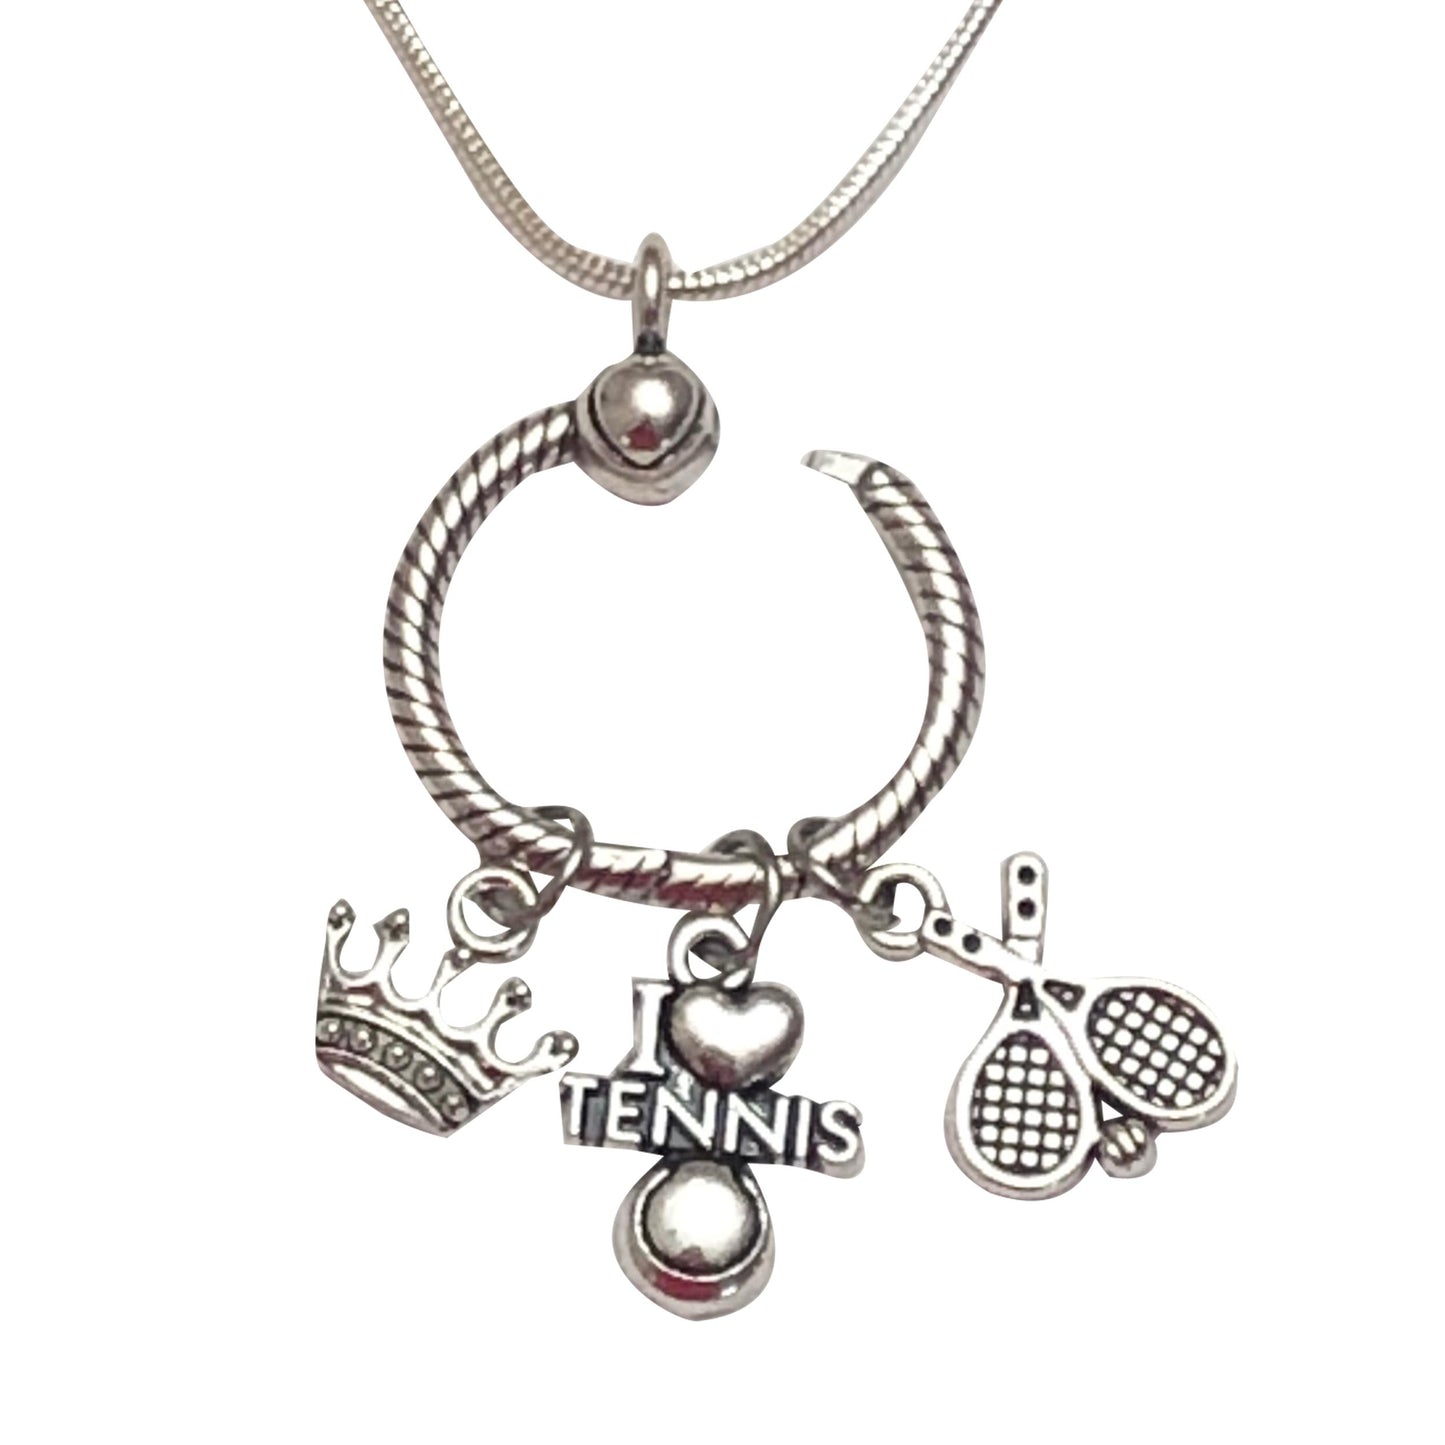 All About Me Sterling Silver Necklace with Charm Holder - Cheer and Dance On Demand